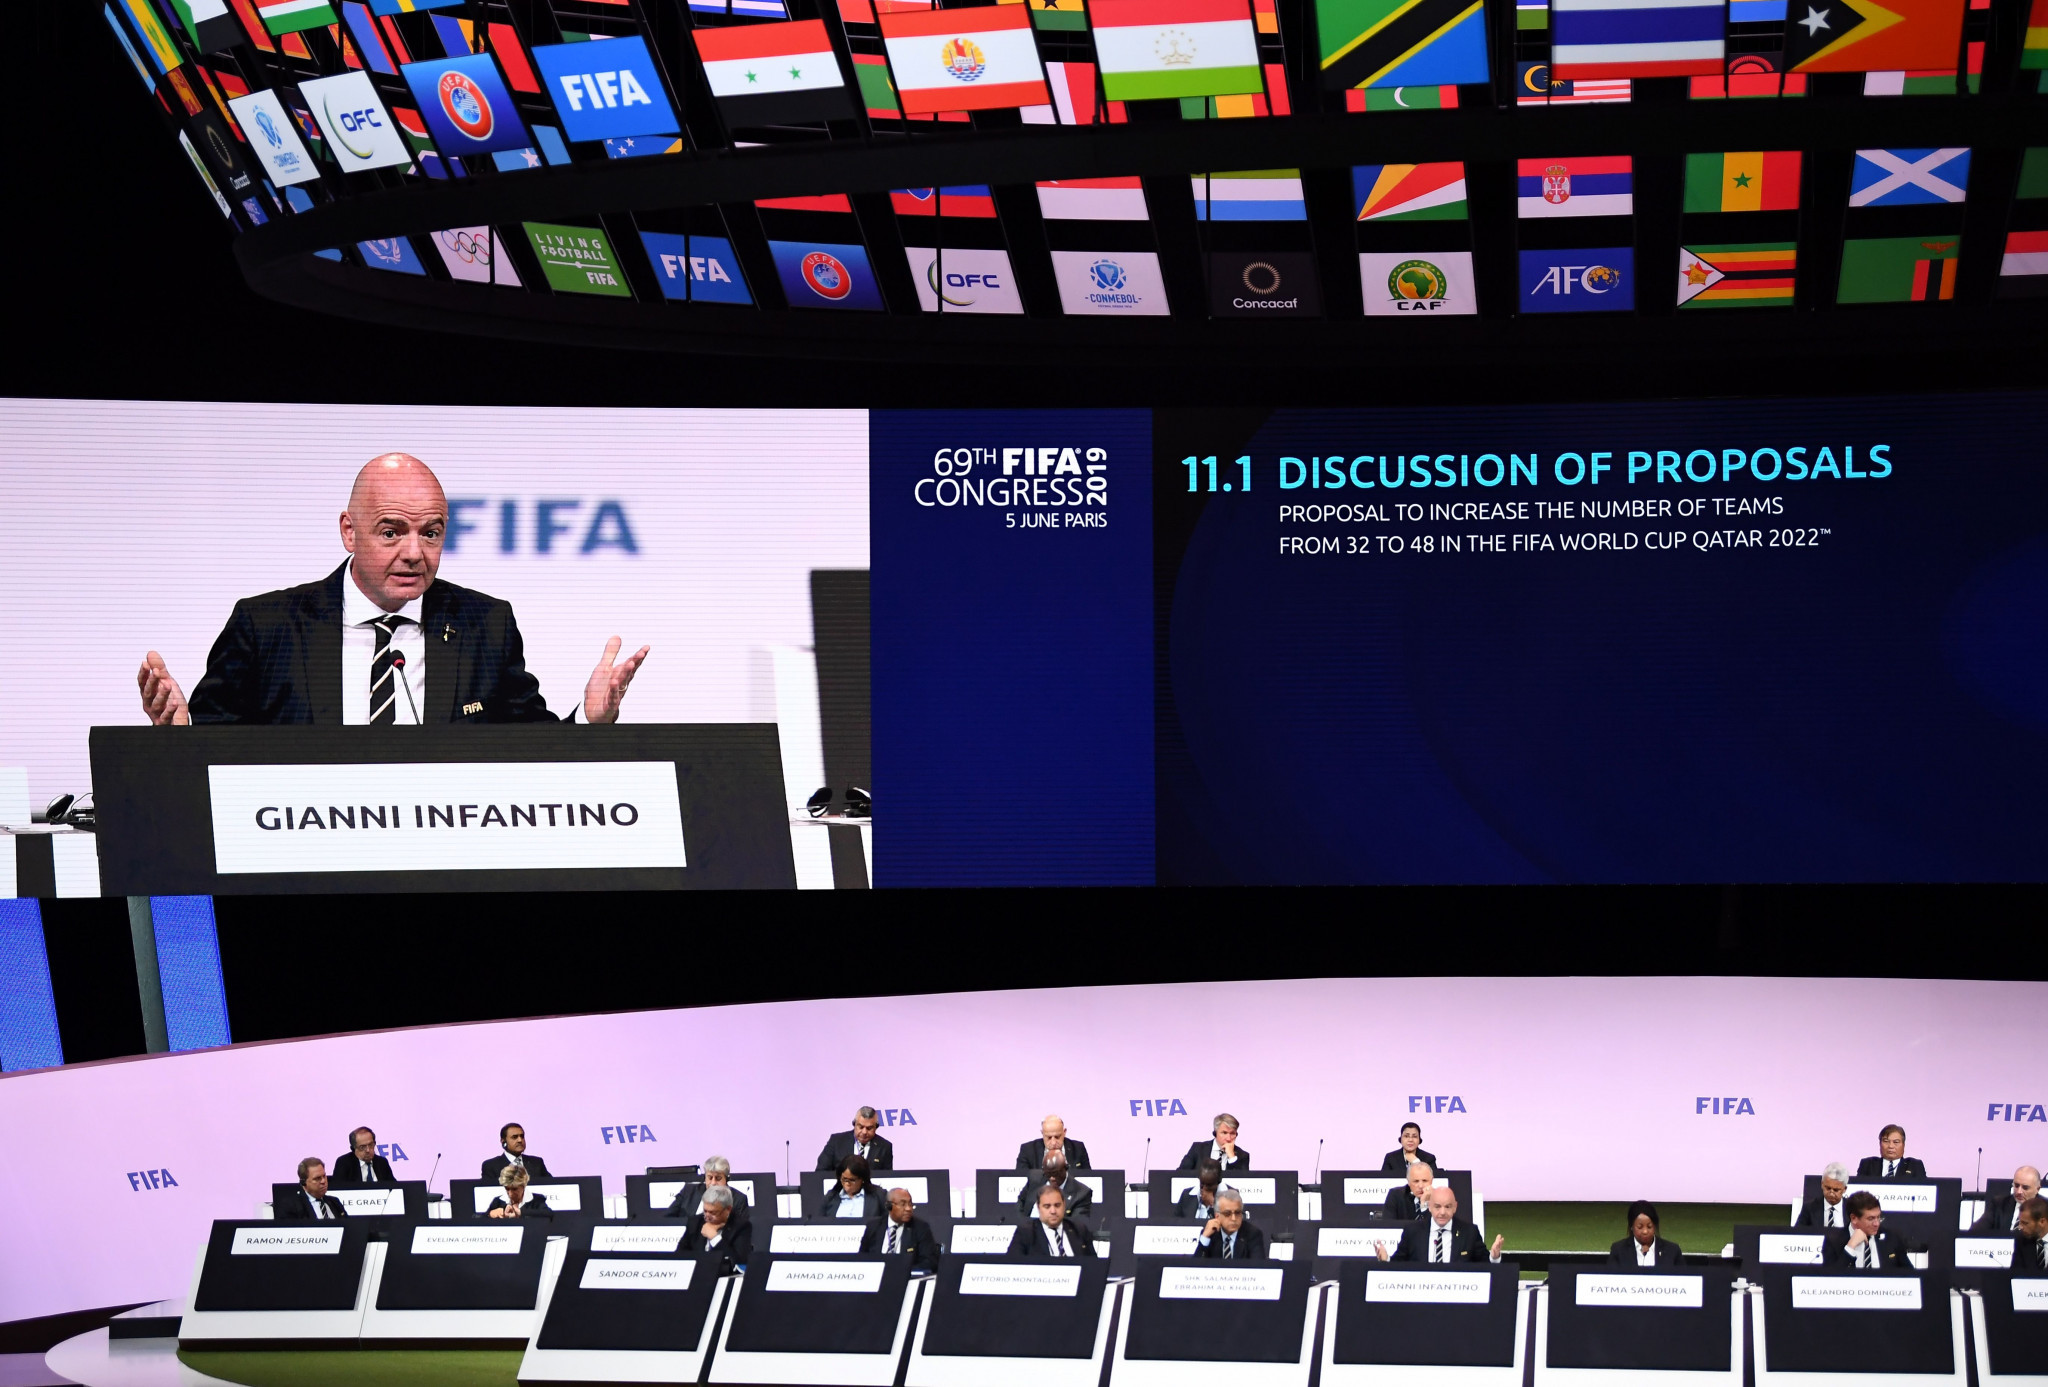 Gianni Infantino said he would continue his plans to expand FIFA's major competitions during his fresh four-year term as President ©Getty Images